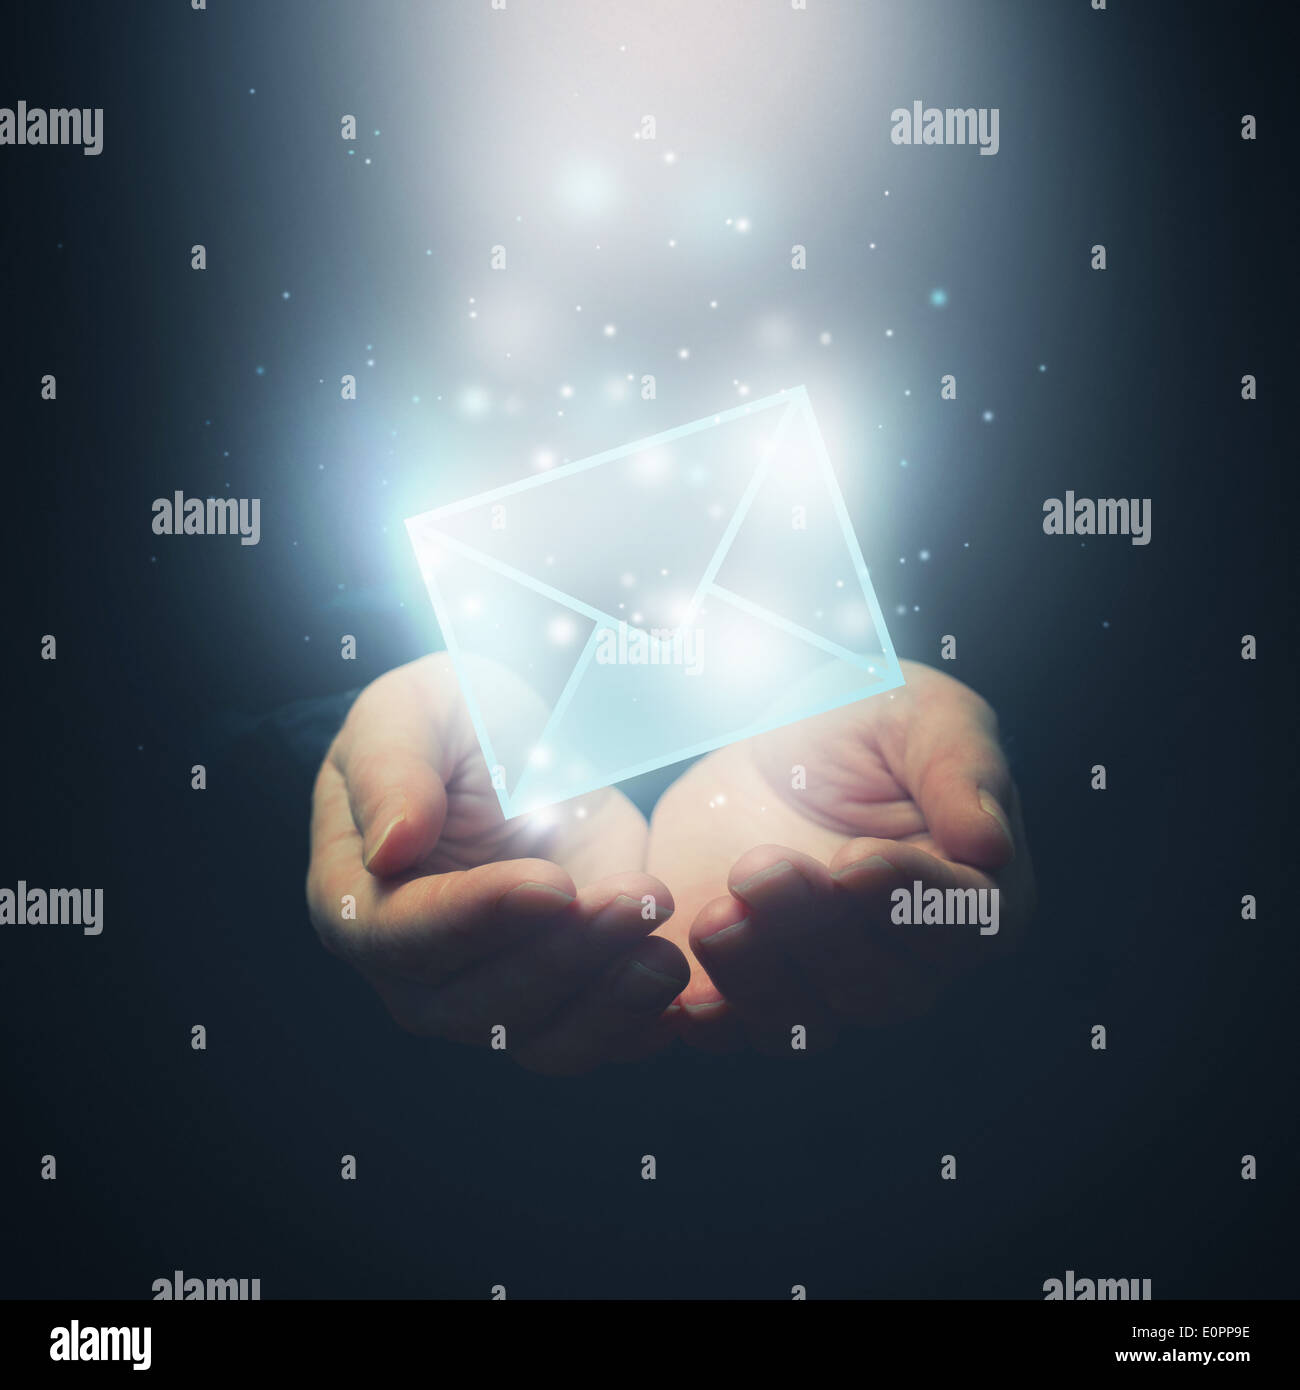 Hands with envelope. E-mail, global communications, mail or contact us concept. Selective focus on fingers. Stock Photo